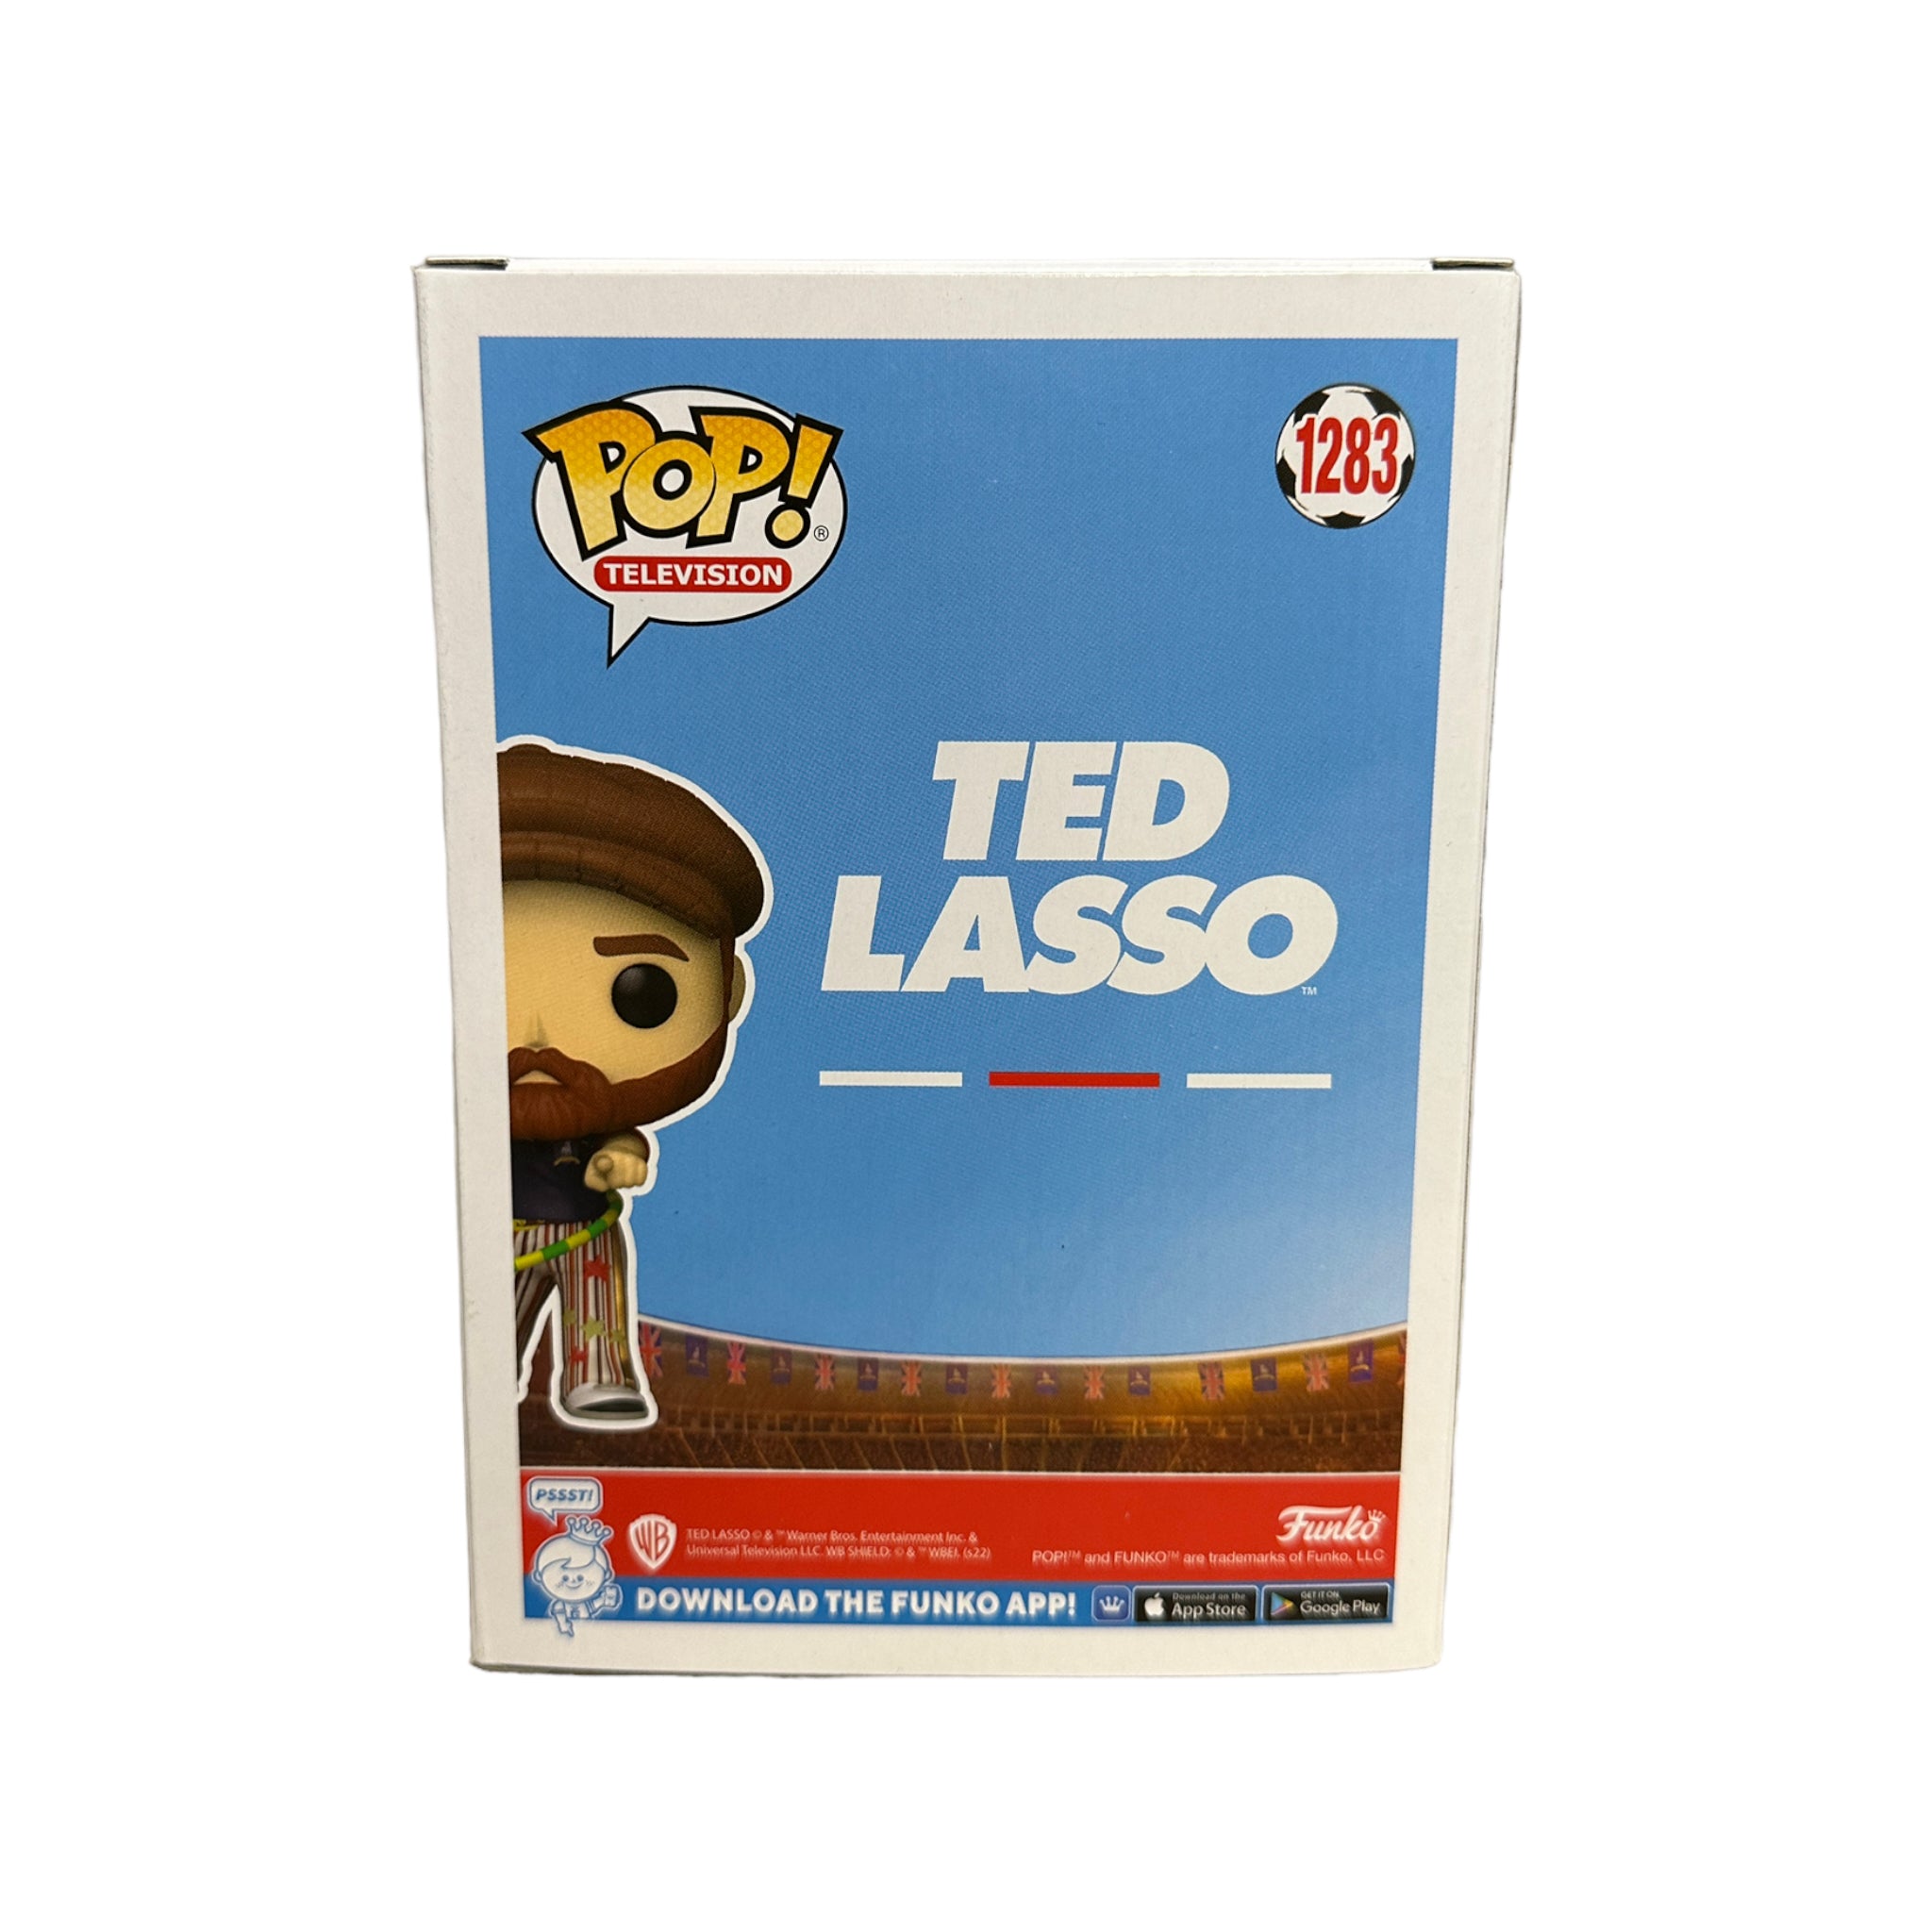 Coach Beard #1283 Funko Pop! - Ted Lasso - NYCC 2022 Shared Exclusive - Condition 8.75/10